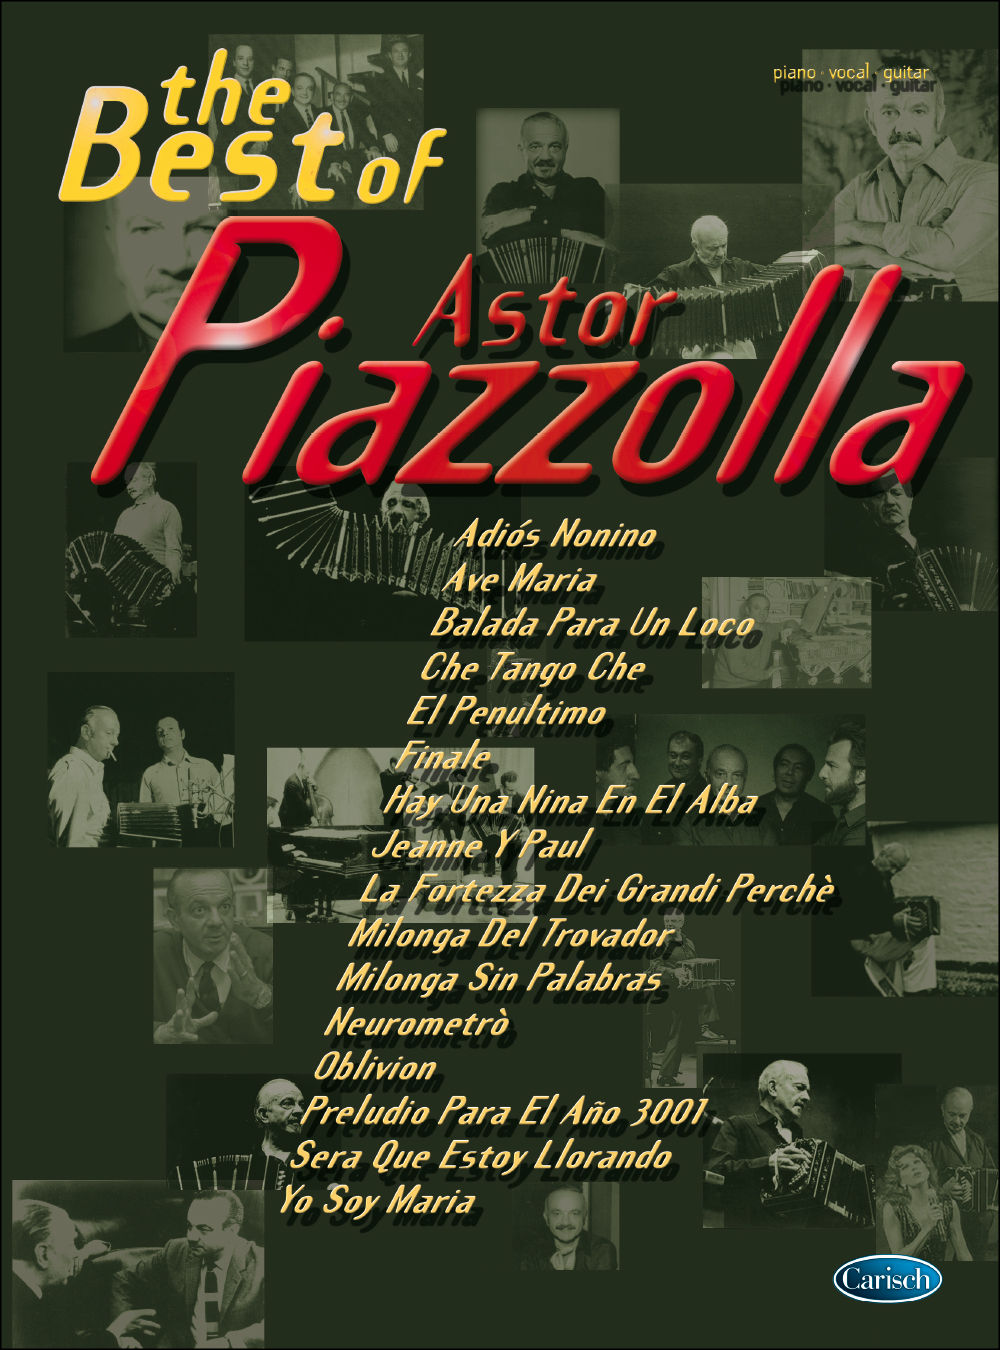 Astor Piazzolla: The Best Of Astor Piazzolla: Piano: Vocal Album